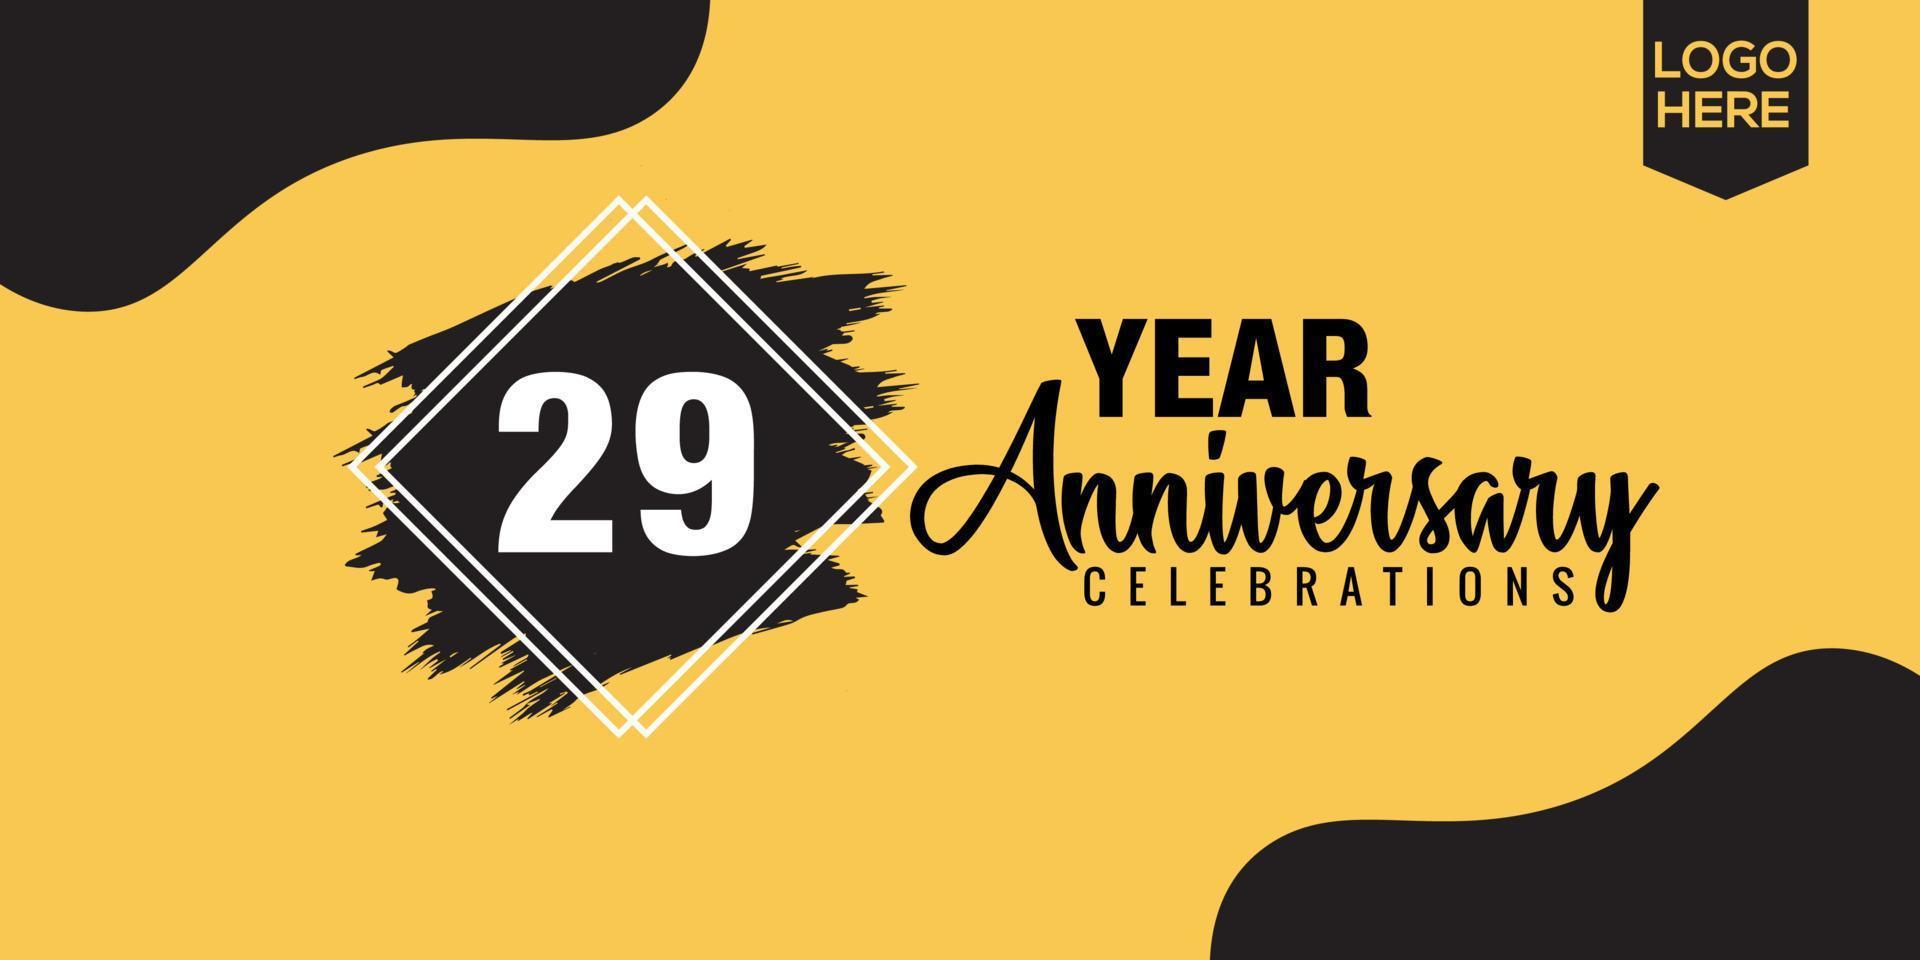 29th years anniversary celebration logo design with black brush and yellow color with black abstract vector illustration